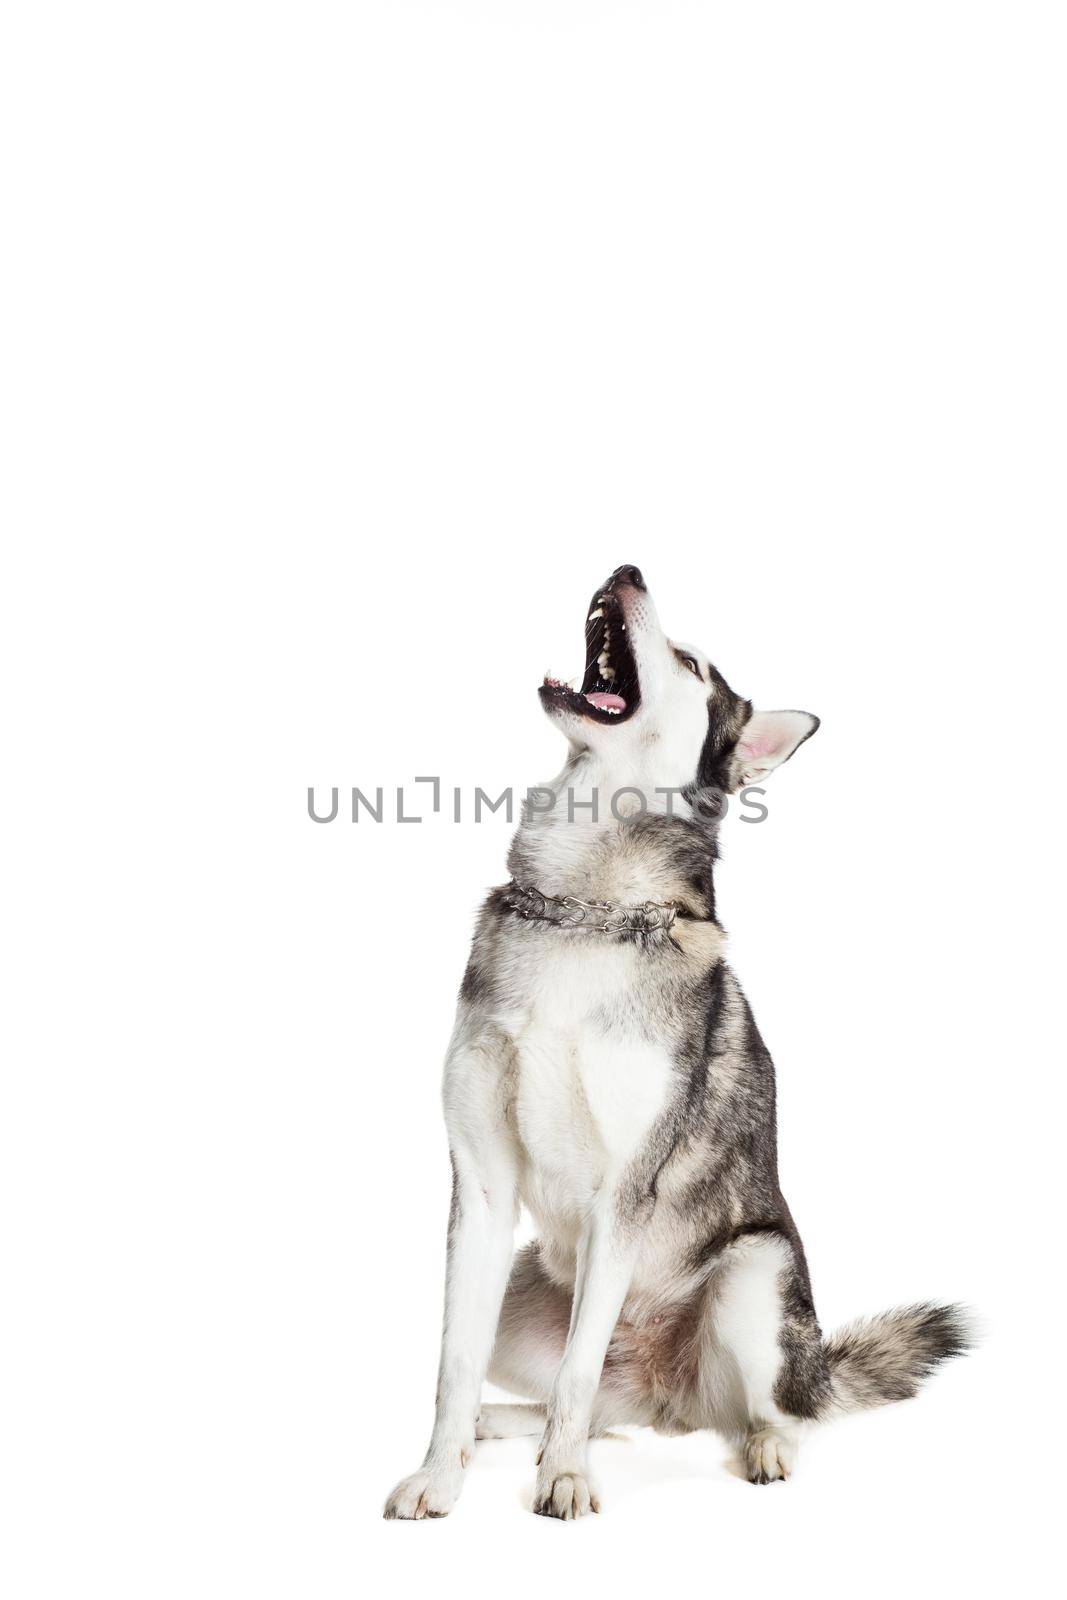 Alaskan Malamute sitting in front of white background. The dog performs a command. Dog catches the ball